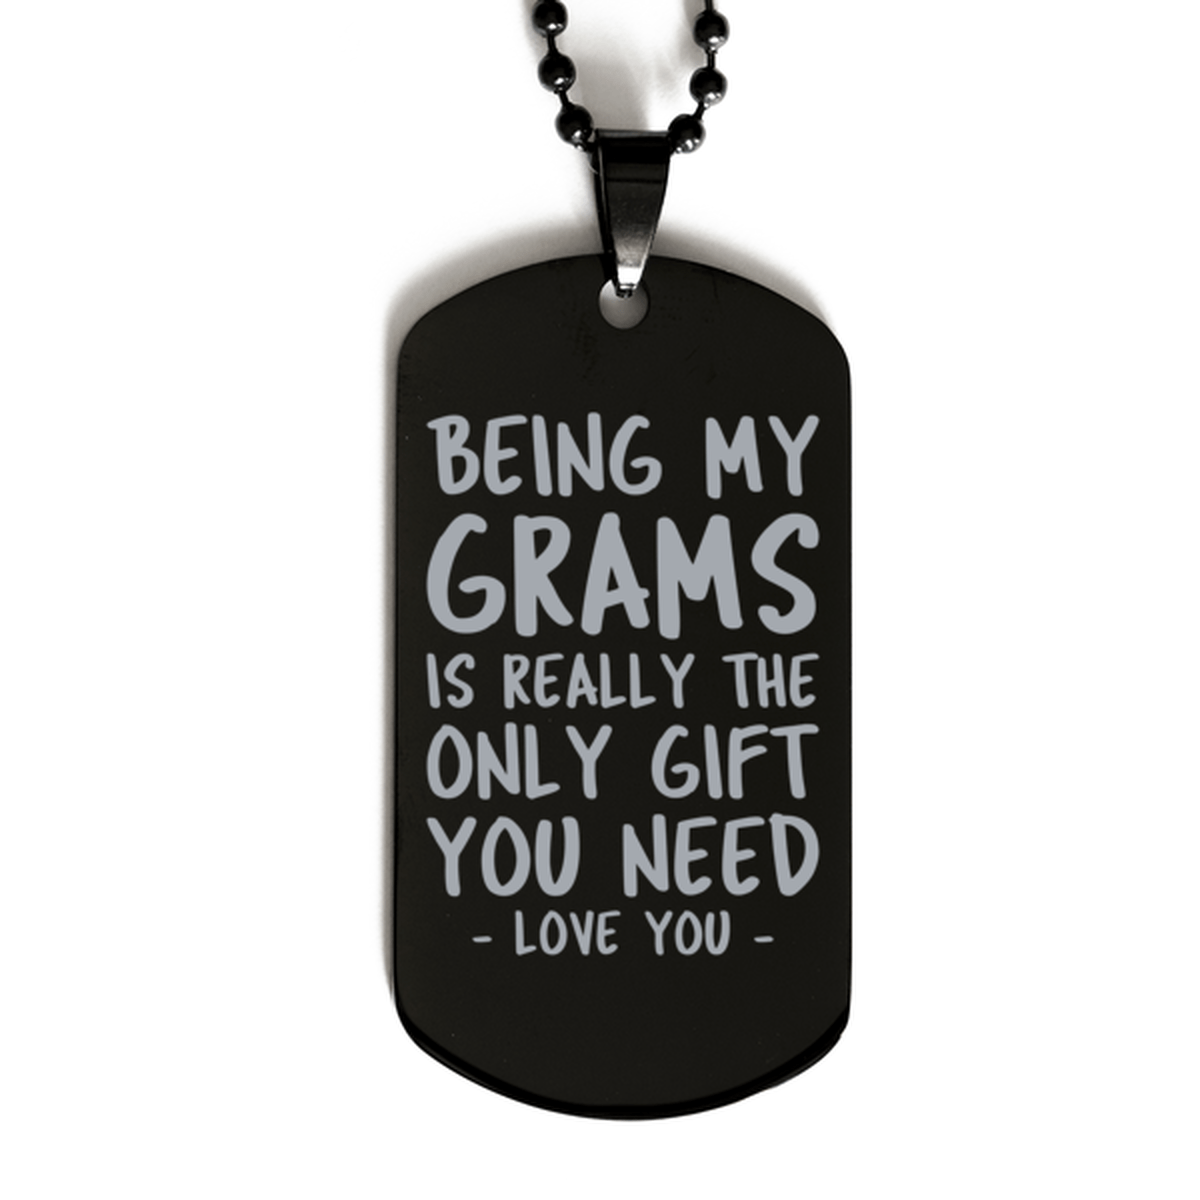 Funny Grams Black Dog Tag Necklace, Being My Grams Is Really the Only Gift You Need, Best Birthday Gifts for Grams